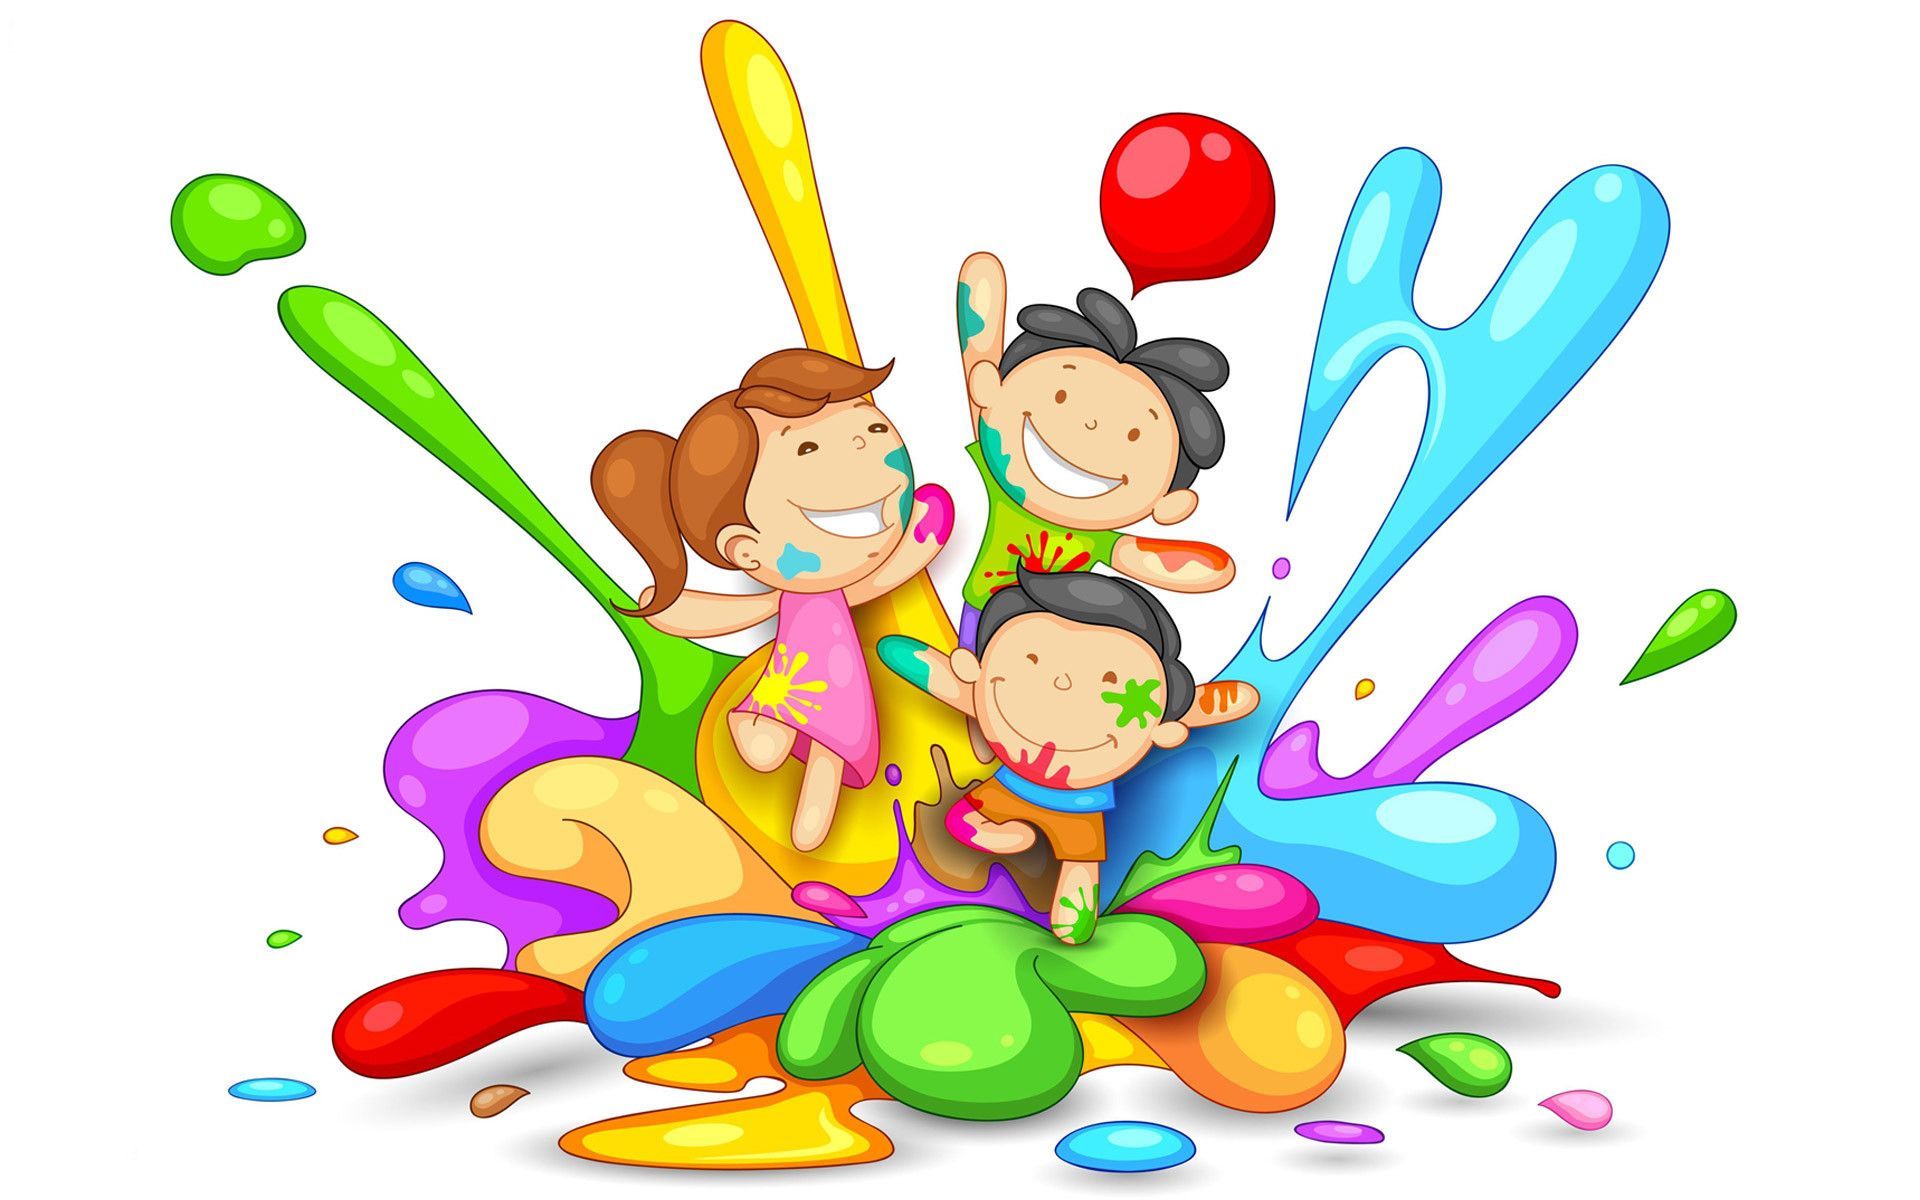 Daycare Wallpaper Free Daycare Background